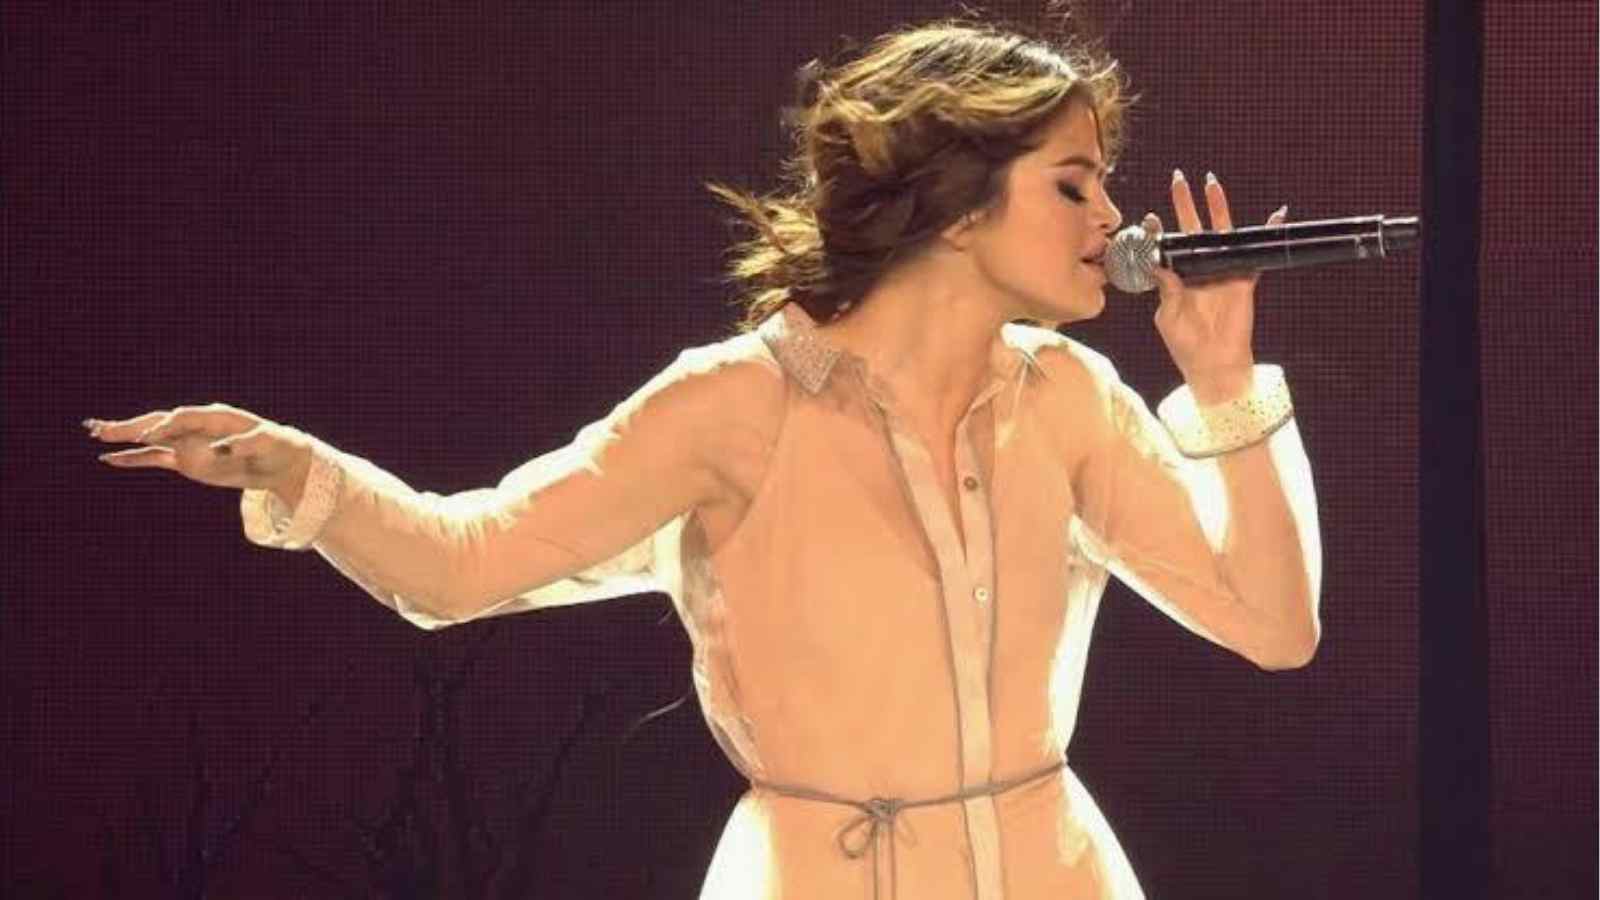 Selena Gomez cried during her Revival Tour since her record label wanted her to do a song with Justin Bieber